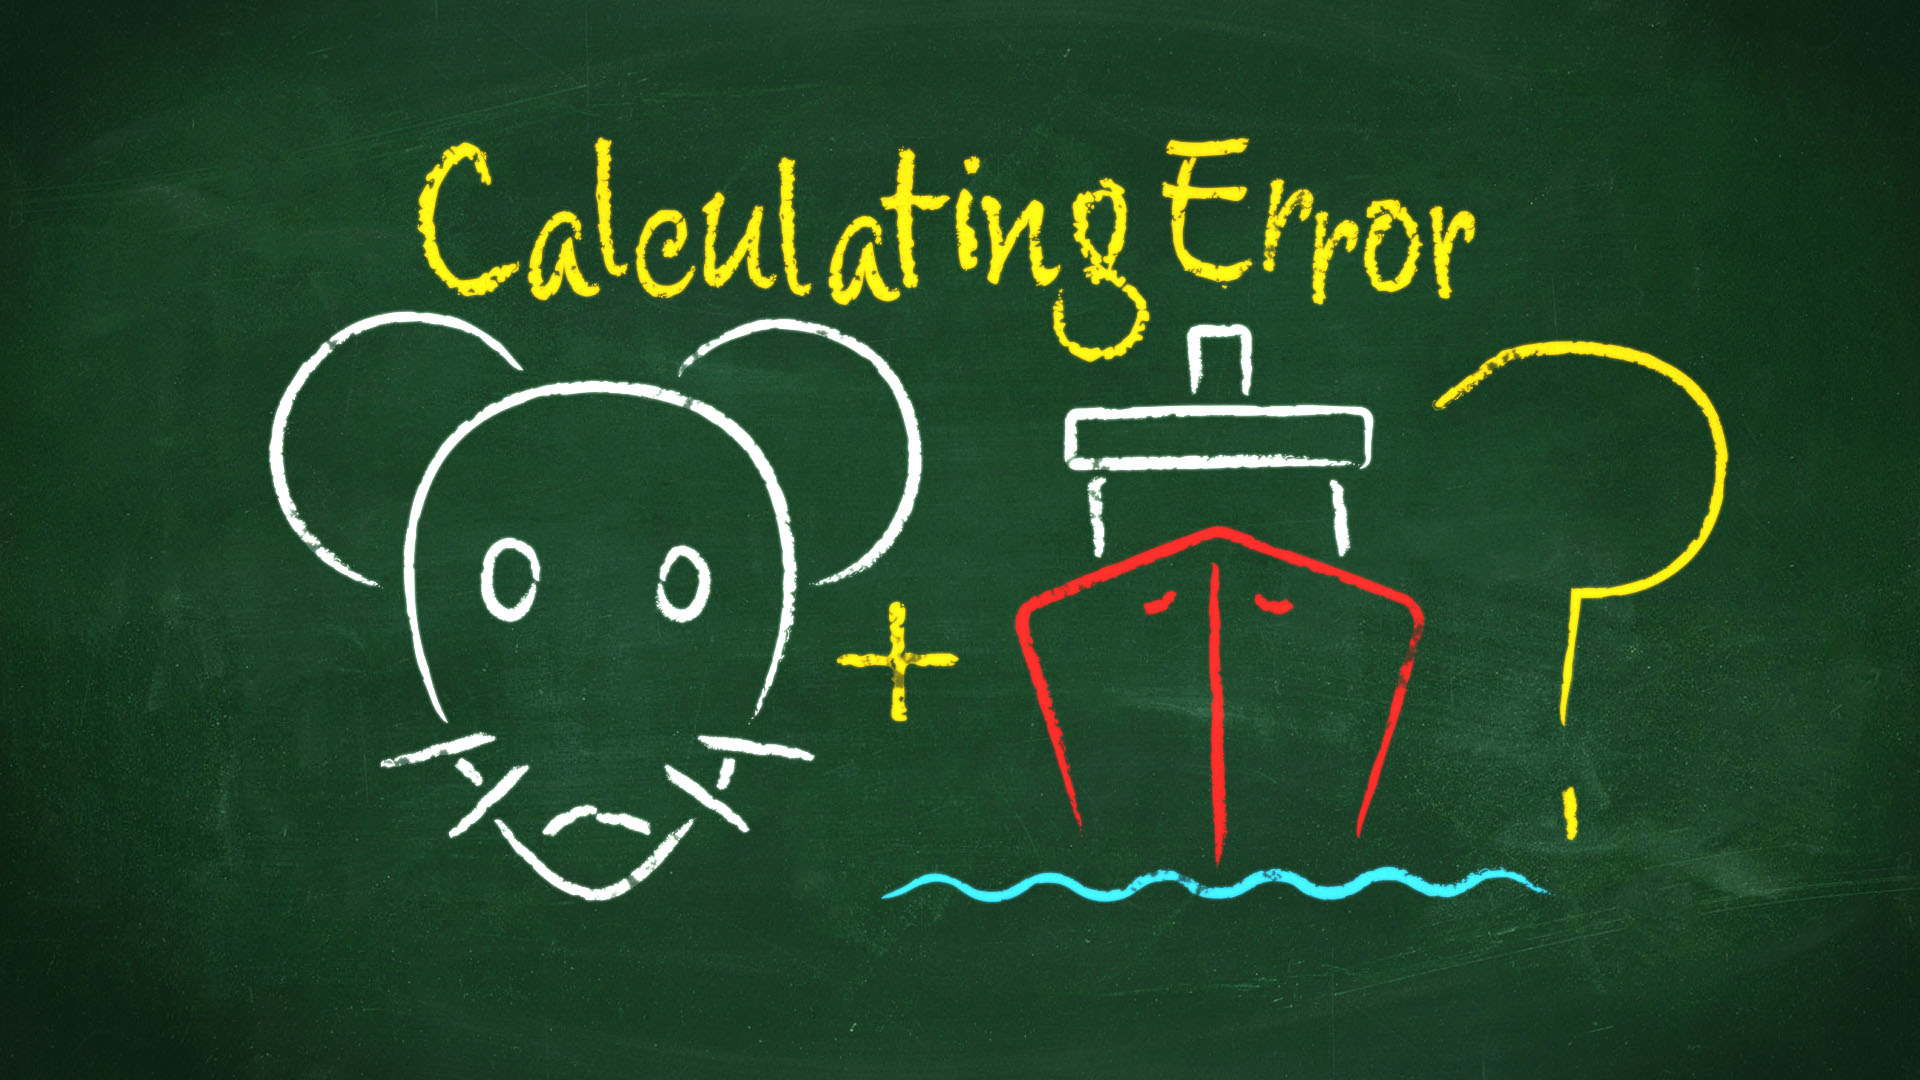 Calculating Error: What do a brain and a ship have in common?